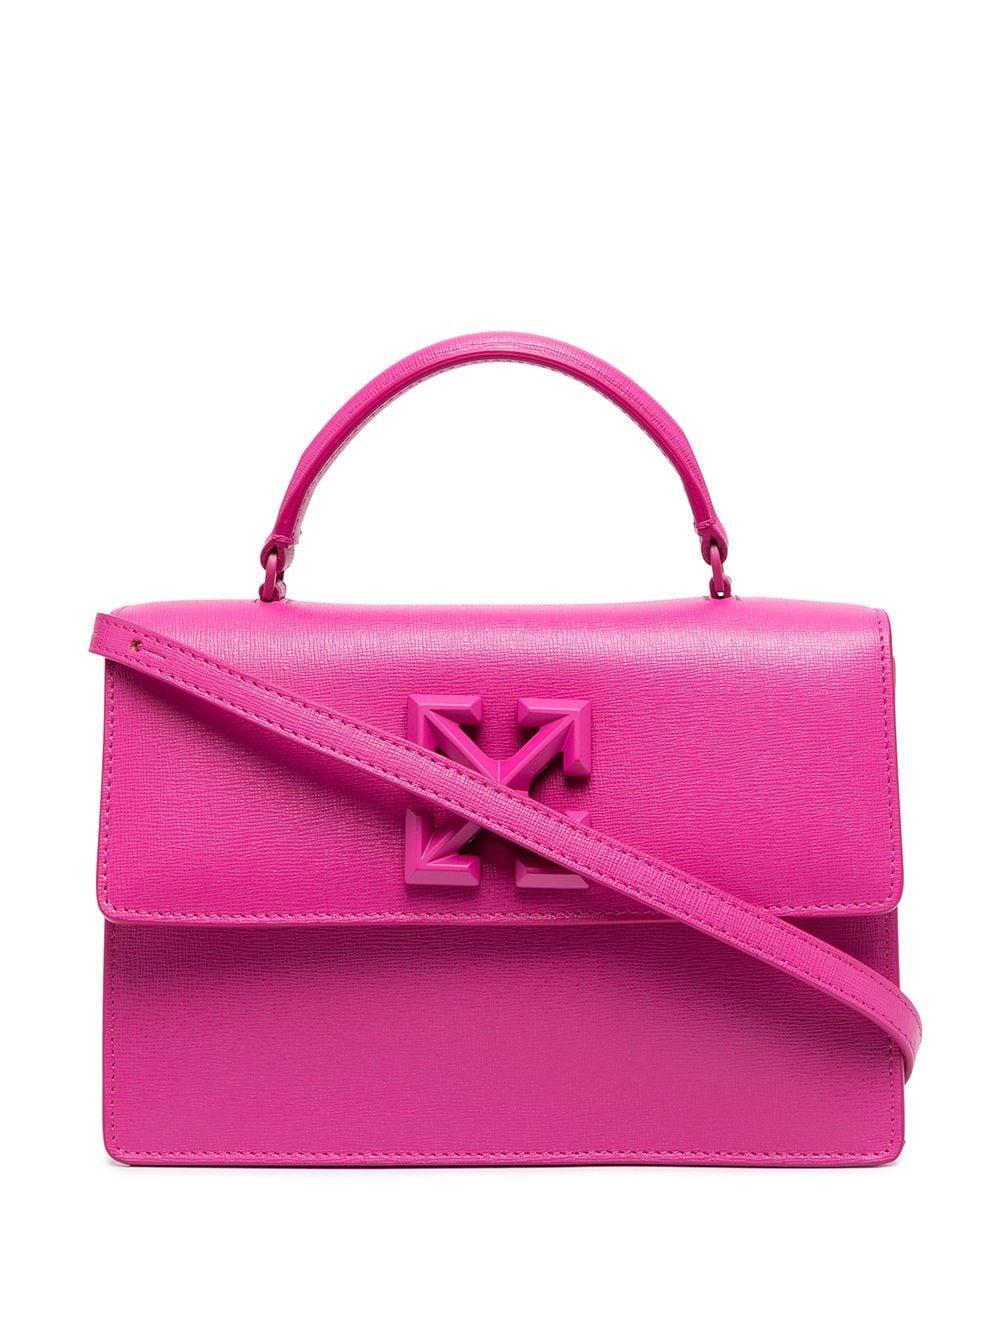 Off-White c/o Virgil Abloh Handbags Leather in Pink